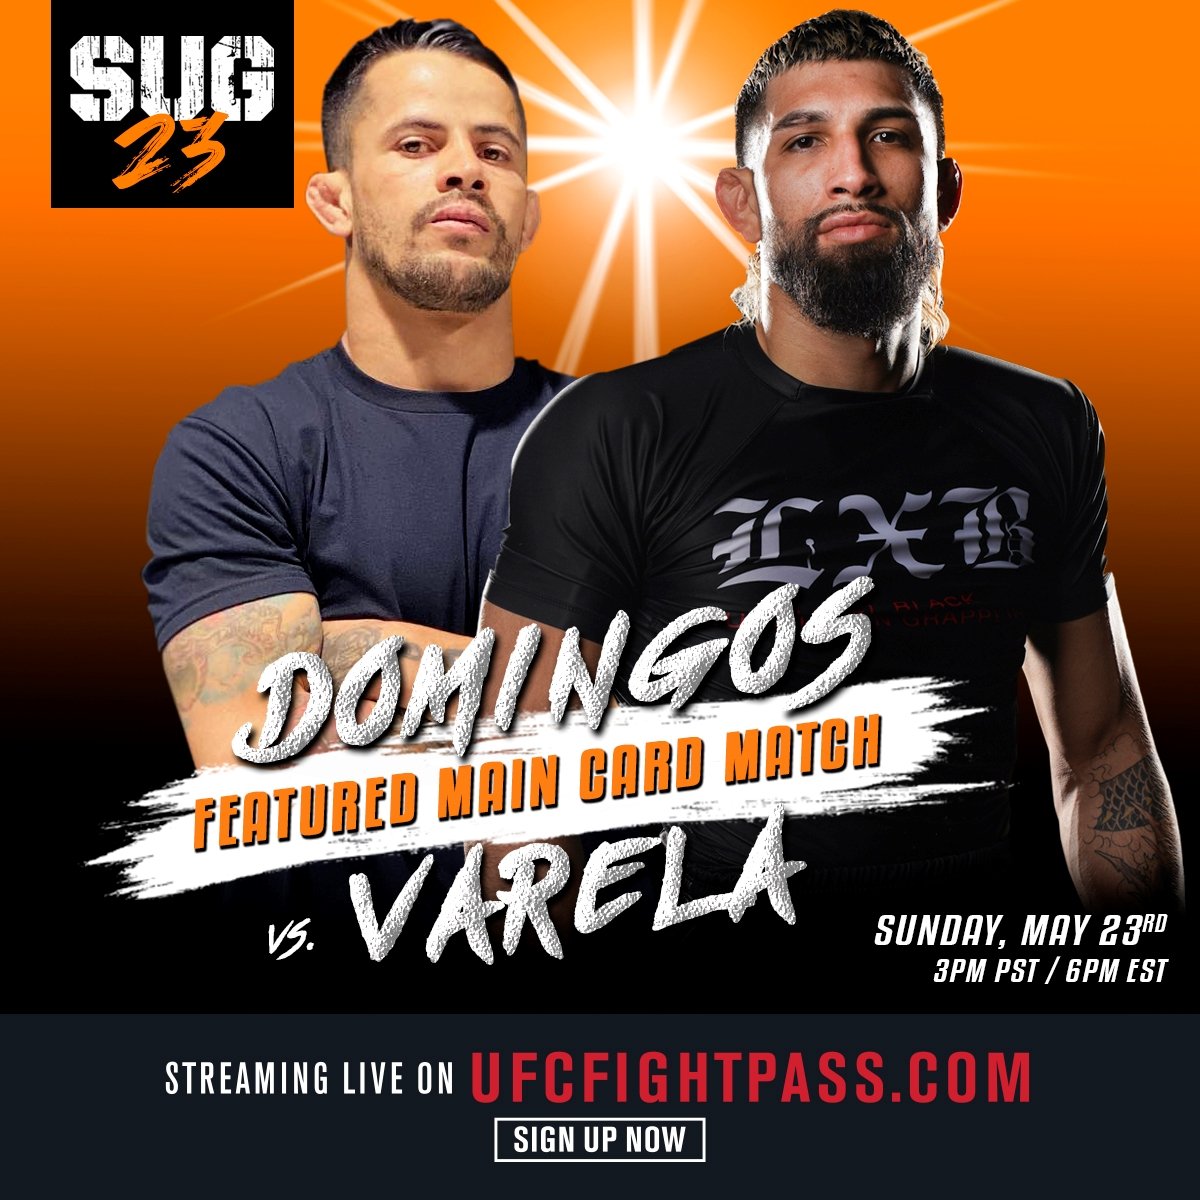 With Joey McKay out due to injury, Rafael Domingos steps in on 5 days notice to face Andy Varela this Sunday at SUG 23! This will be a fun main card opener to watch...catch the entire card airing live this Sunday, May 23rd only on @UFCFightPass